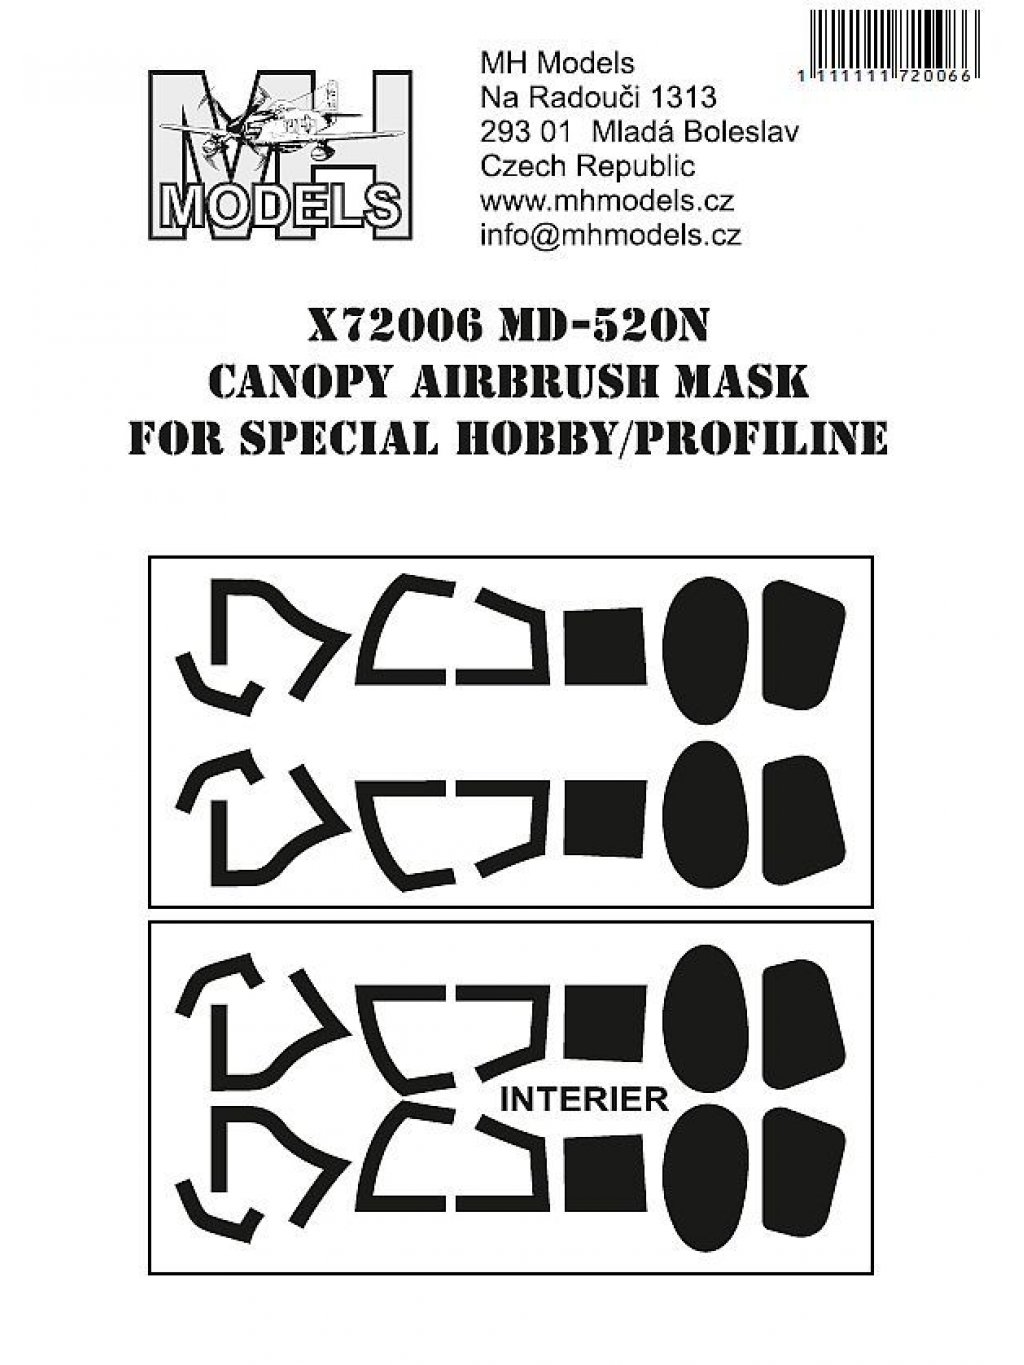 MD-520N Canopy Airbrush Mask for Special Hobby / Profiline